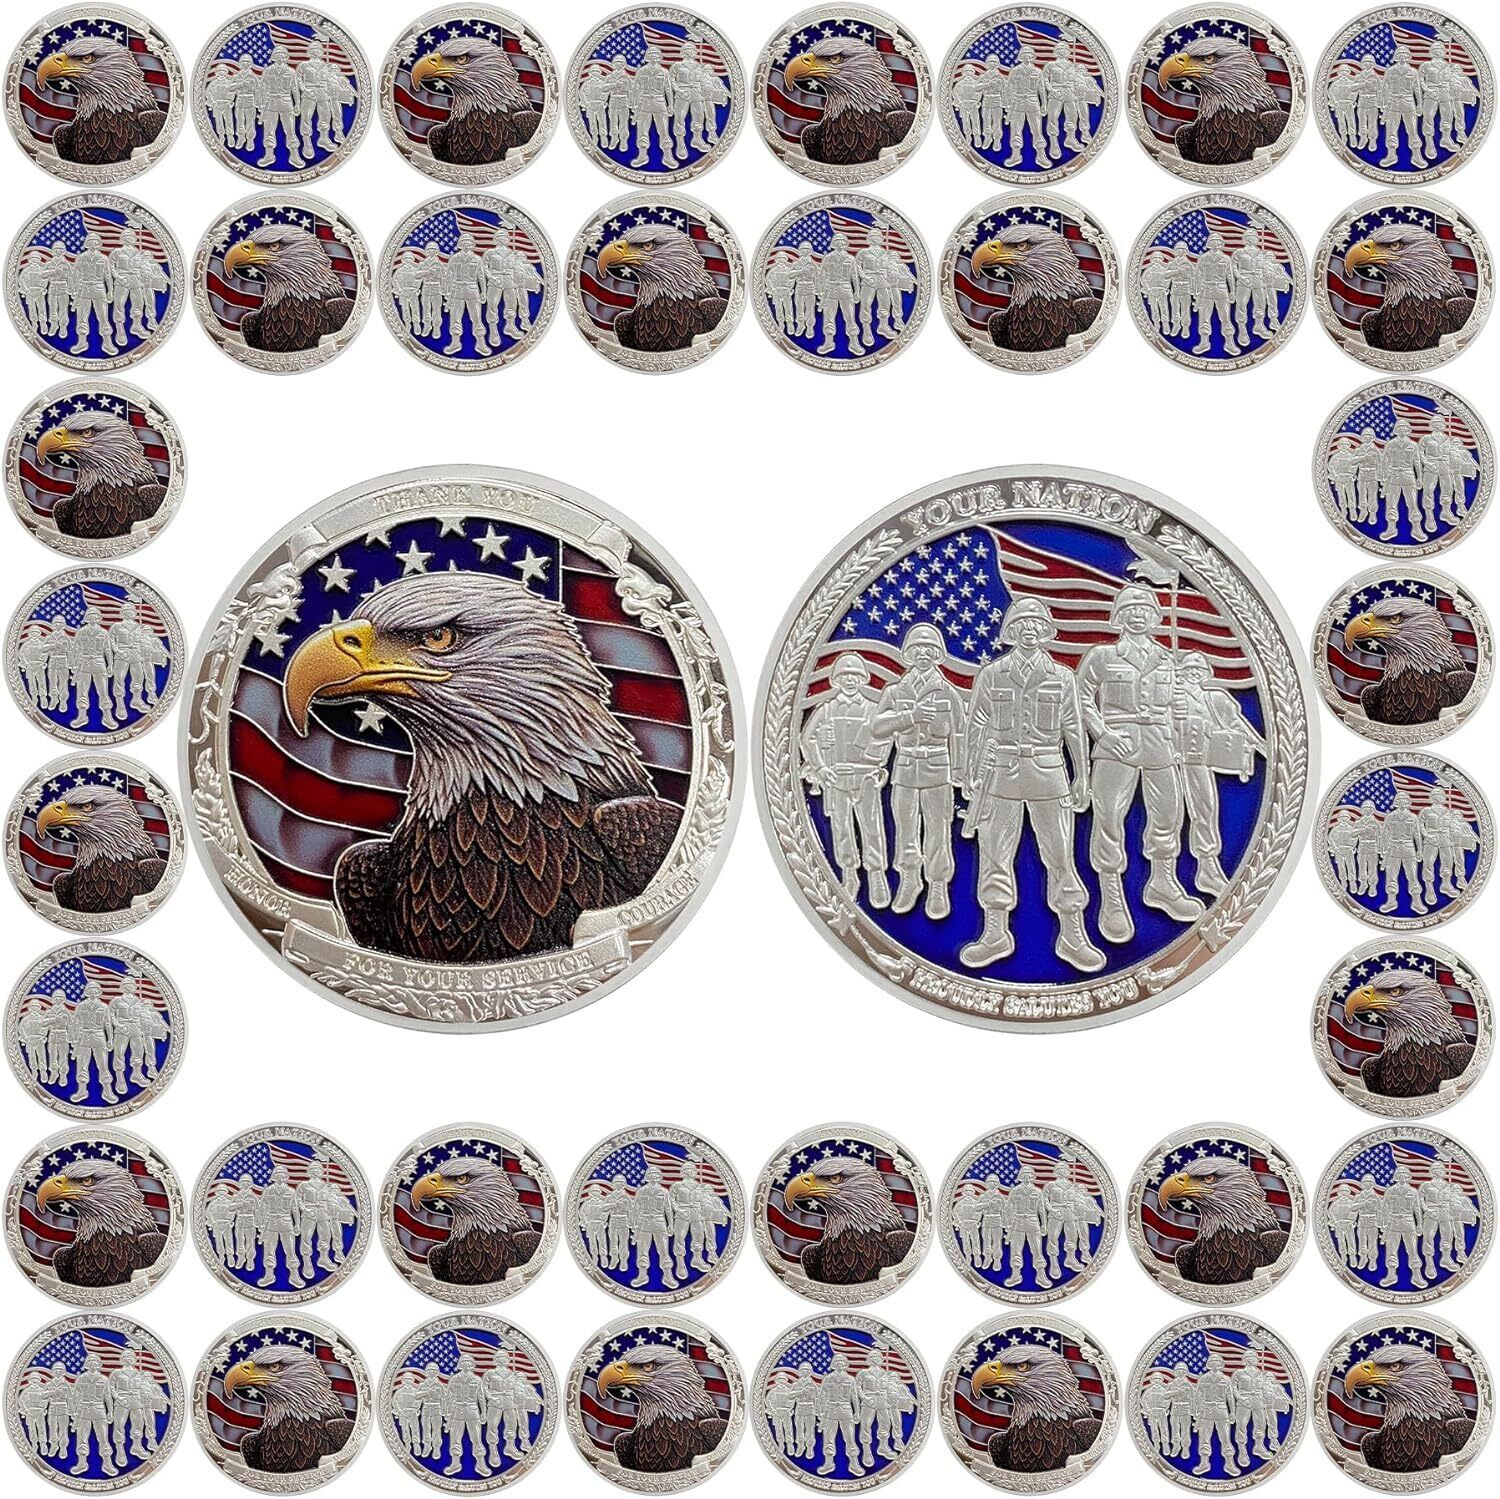 42Pcs Military Thank You for Your Service Challenge Coin Veterans Soldiers Gift